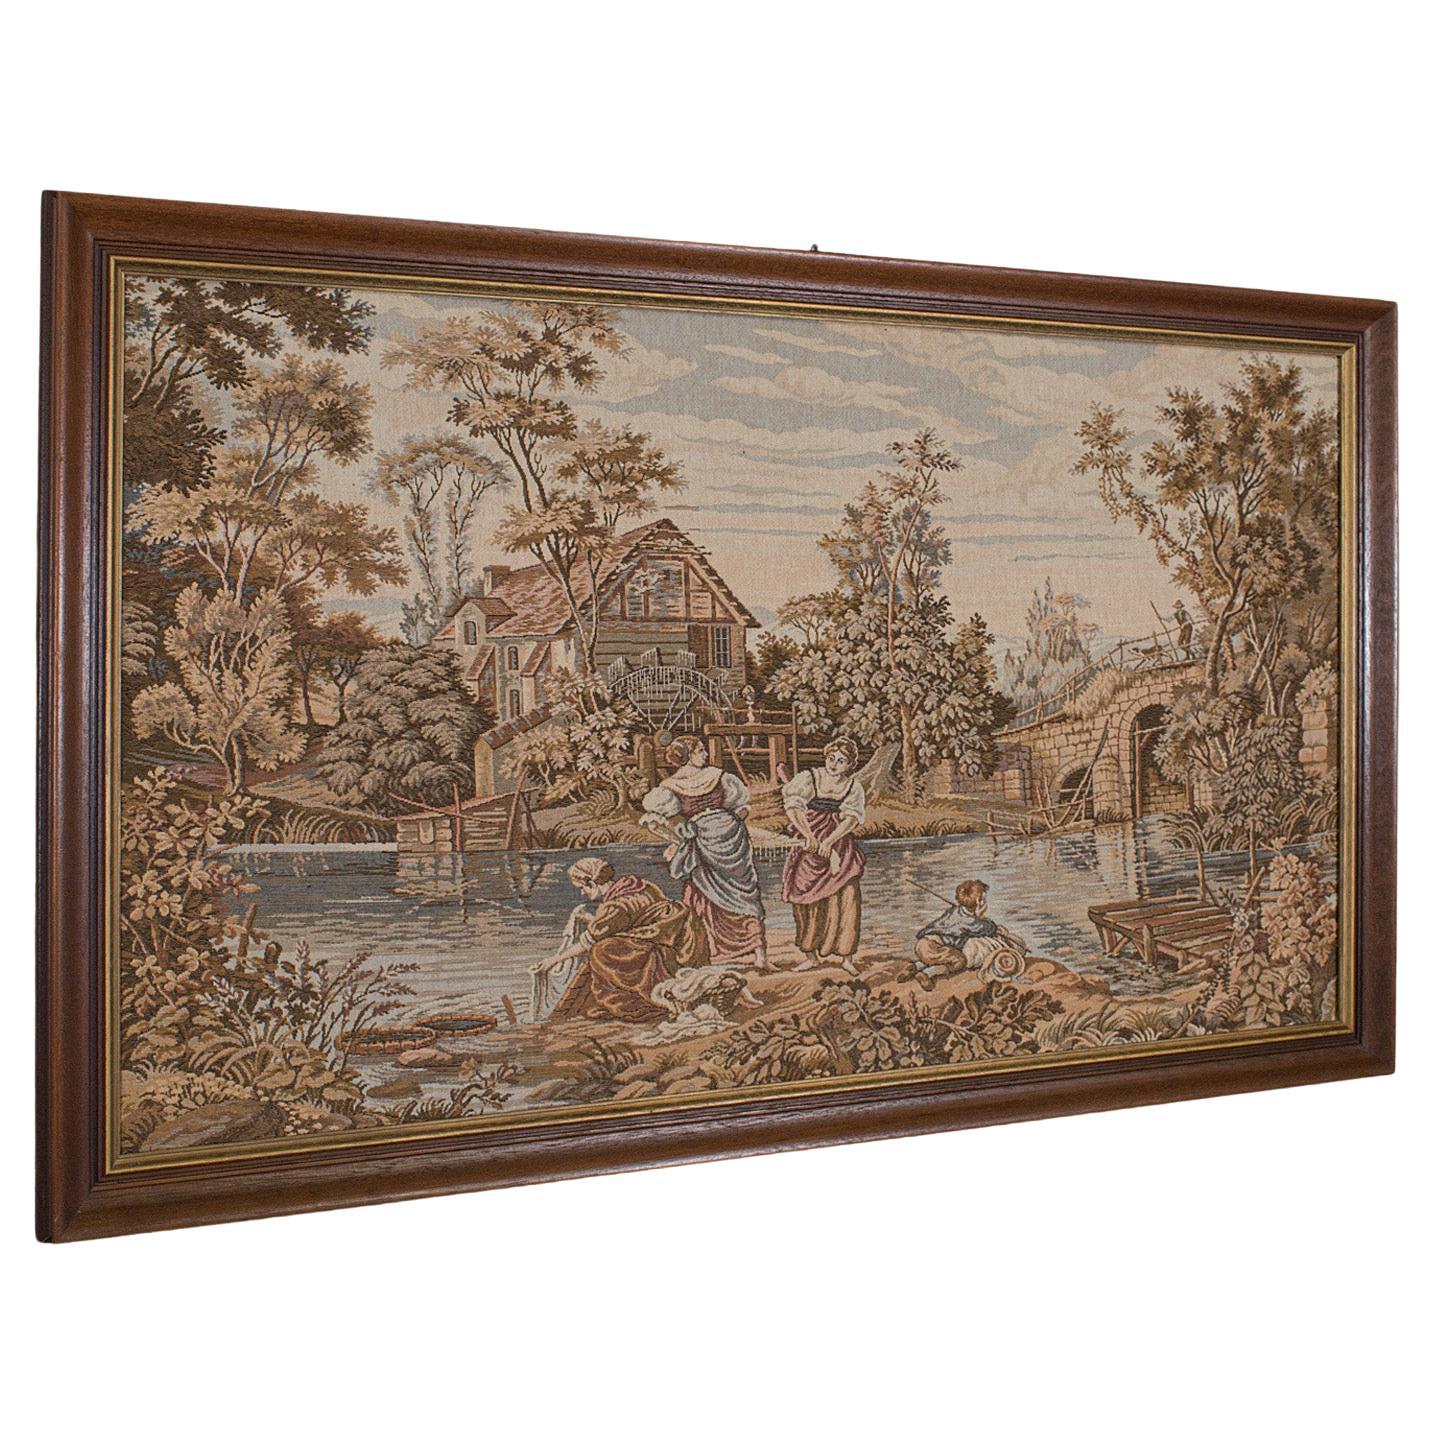 Vintage Panoramic Tapestry, French, Needlepoint, Decorative Panel, Circa 1930